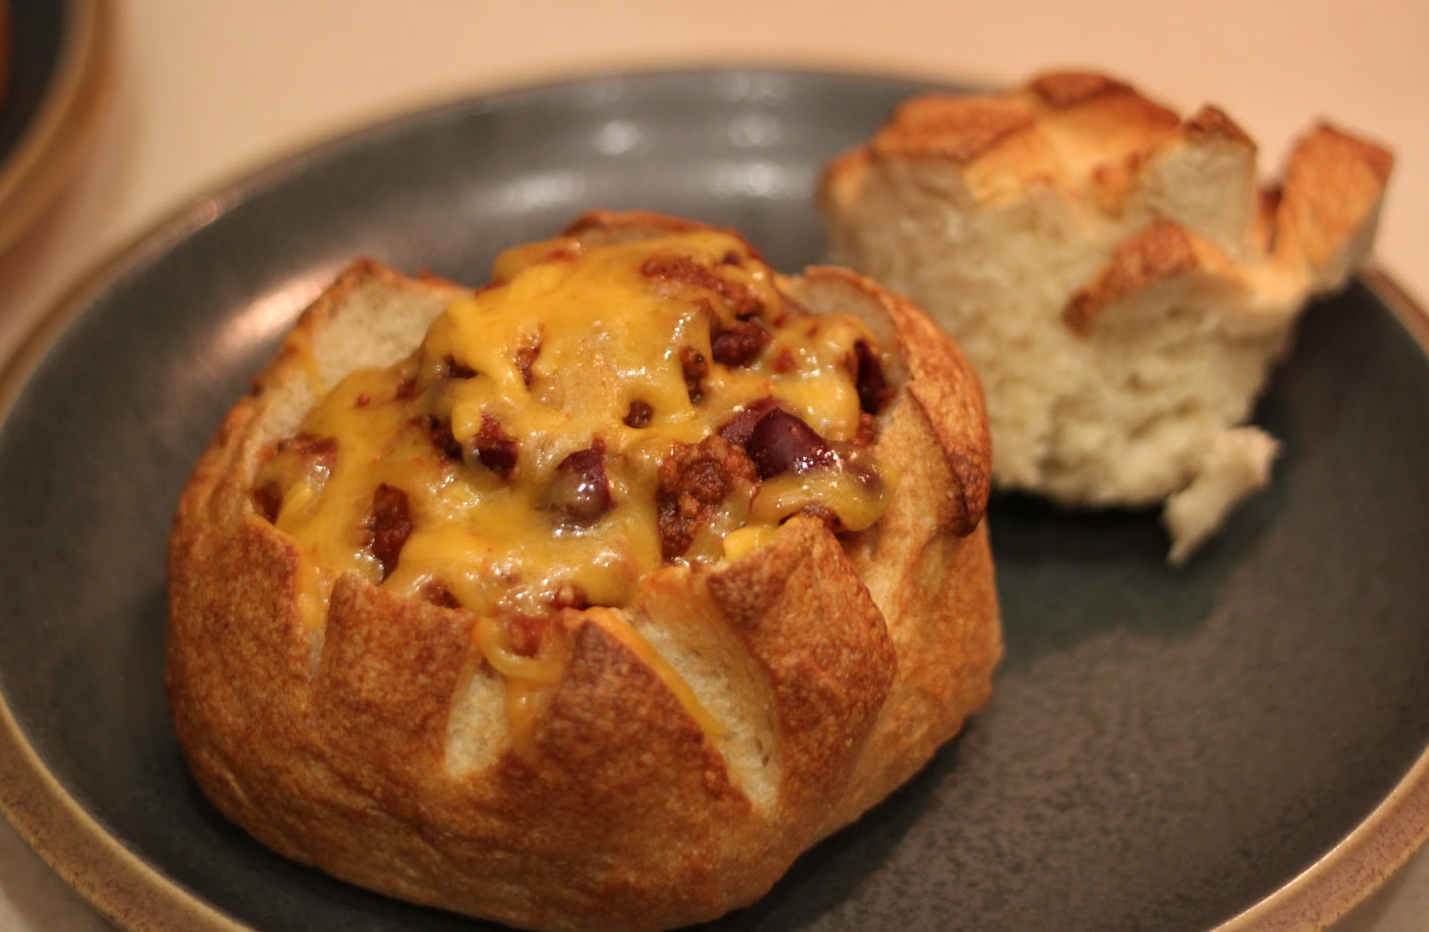 Bread, chili, cheese... what more could you possibly ask for??